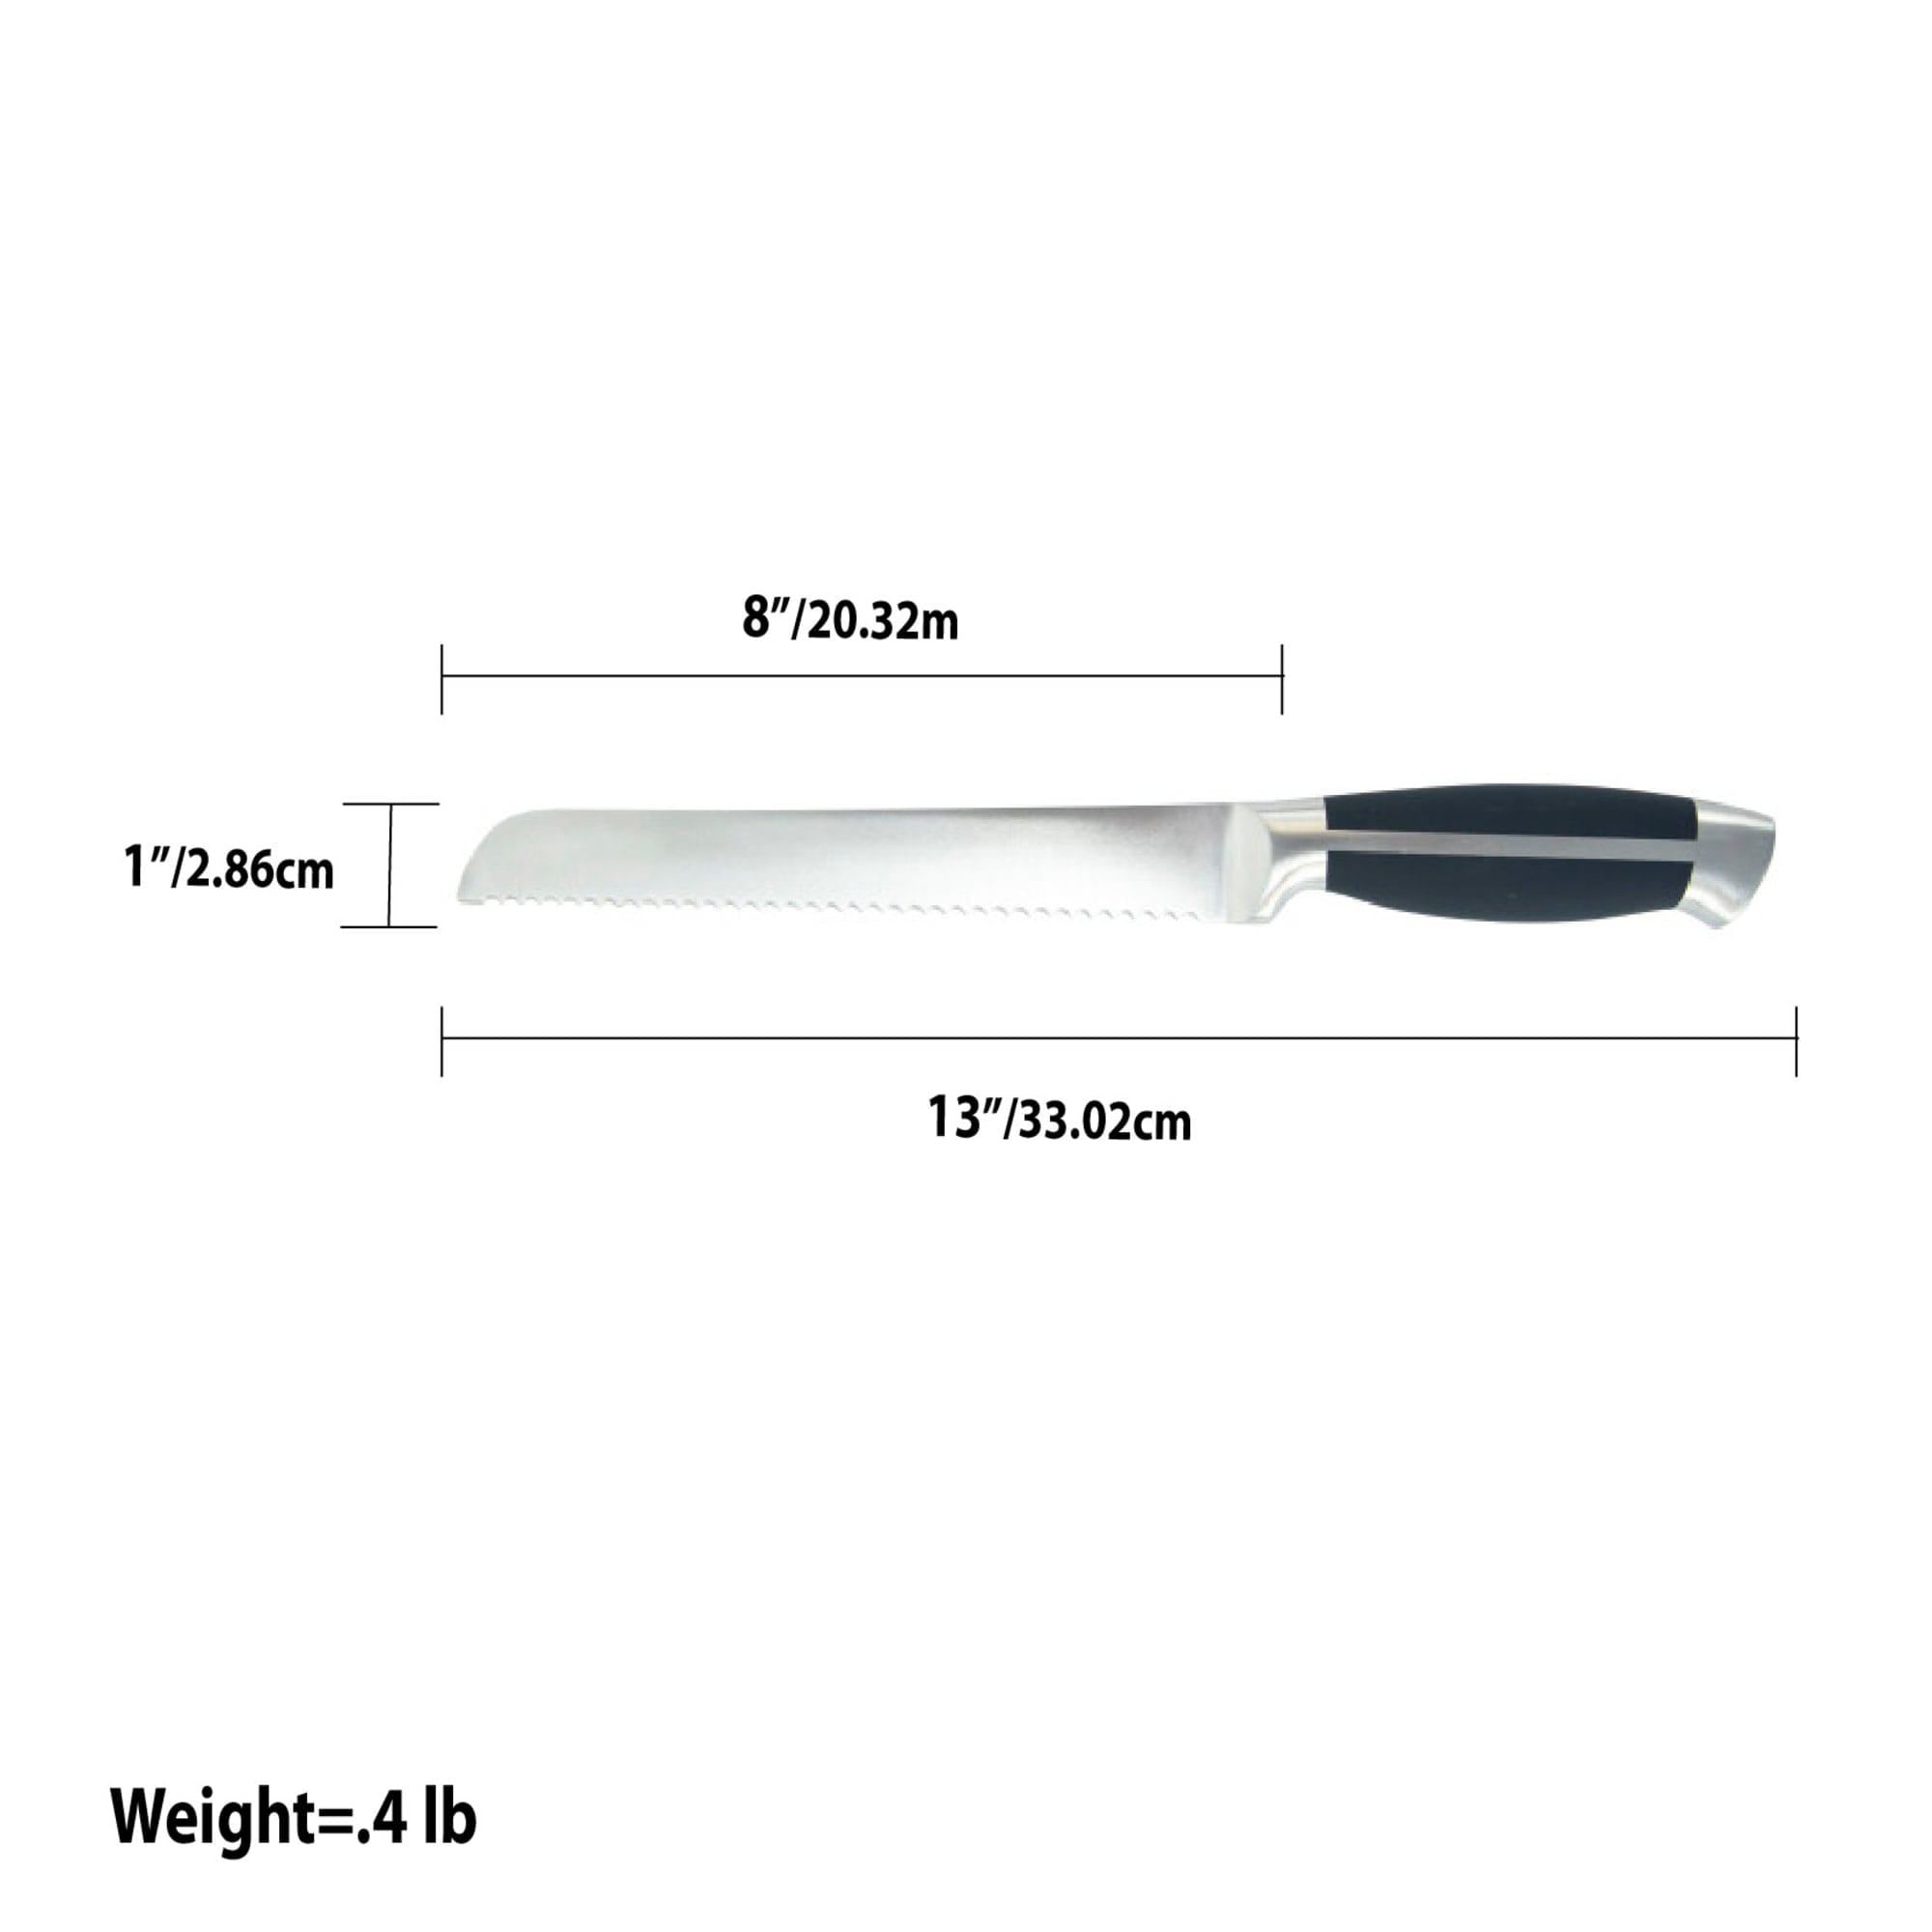 Home Basics Continental Collection 8" Bread Knife $4.00 EACH, CASE PACK OF 24